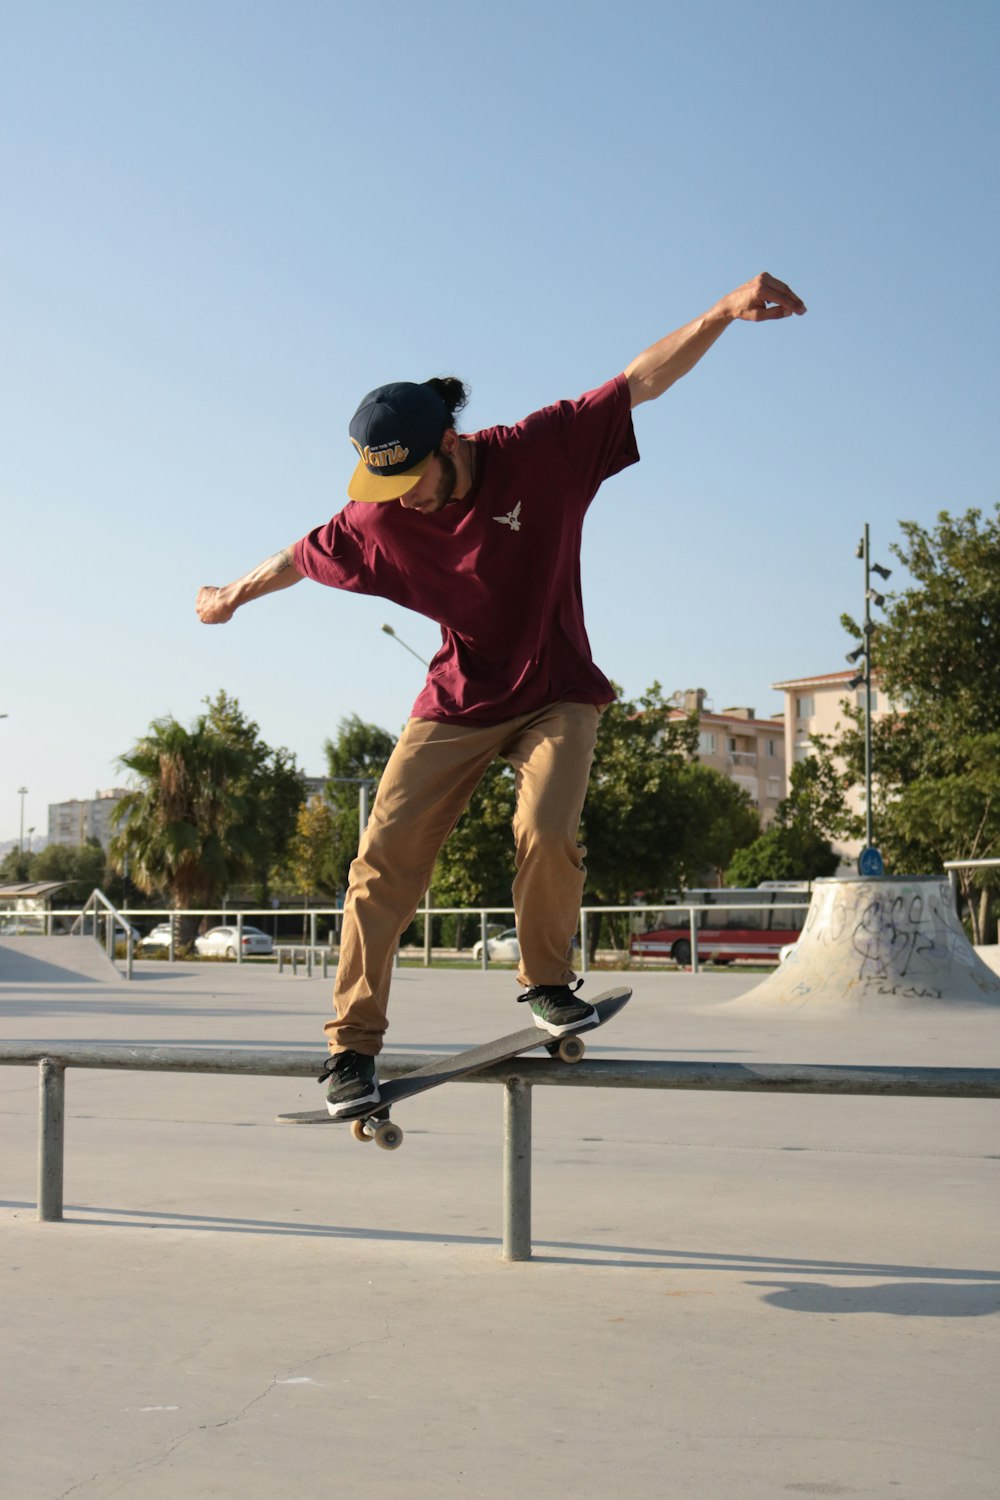 man in red t-shirt and brown pants doing skateboard stunts during daytime